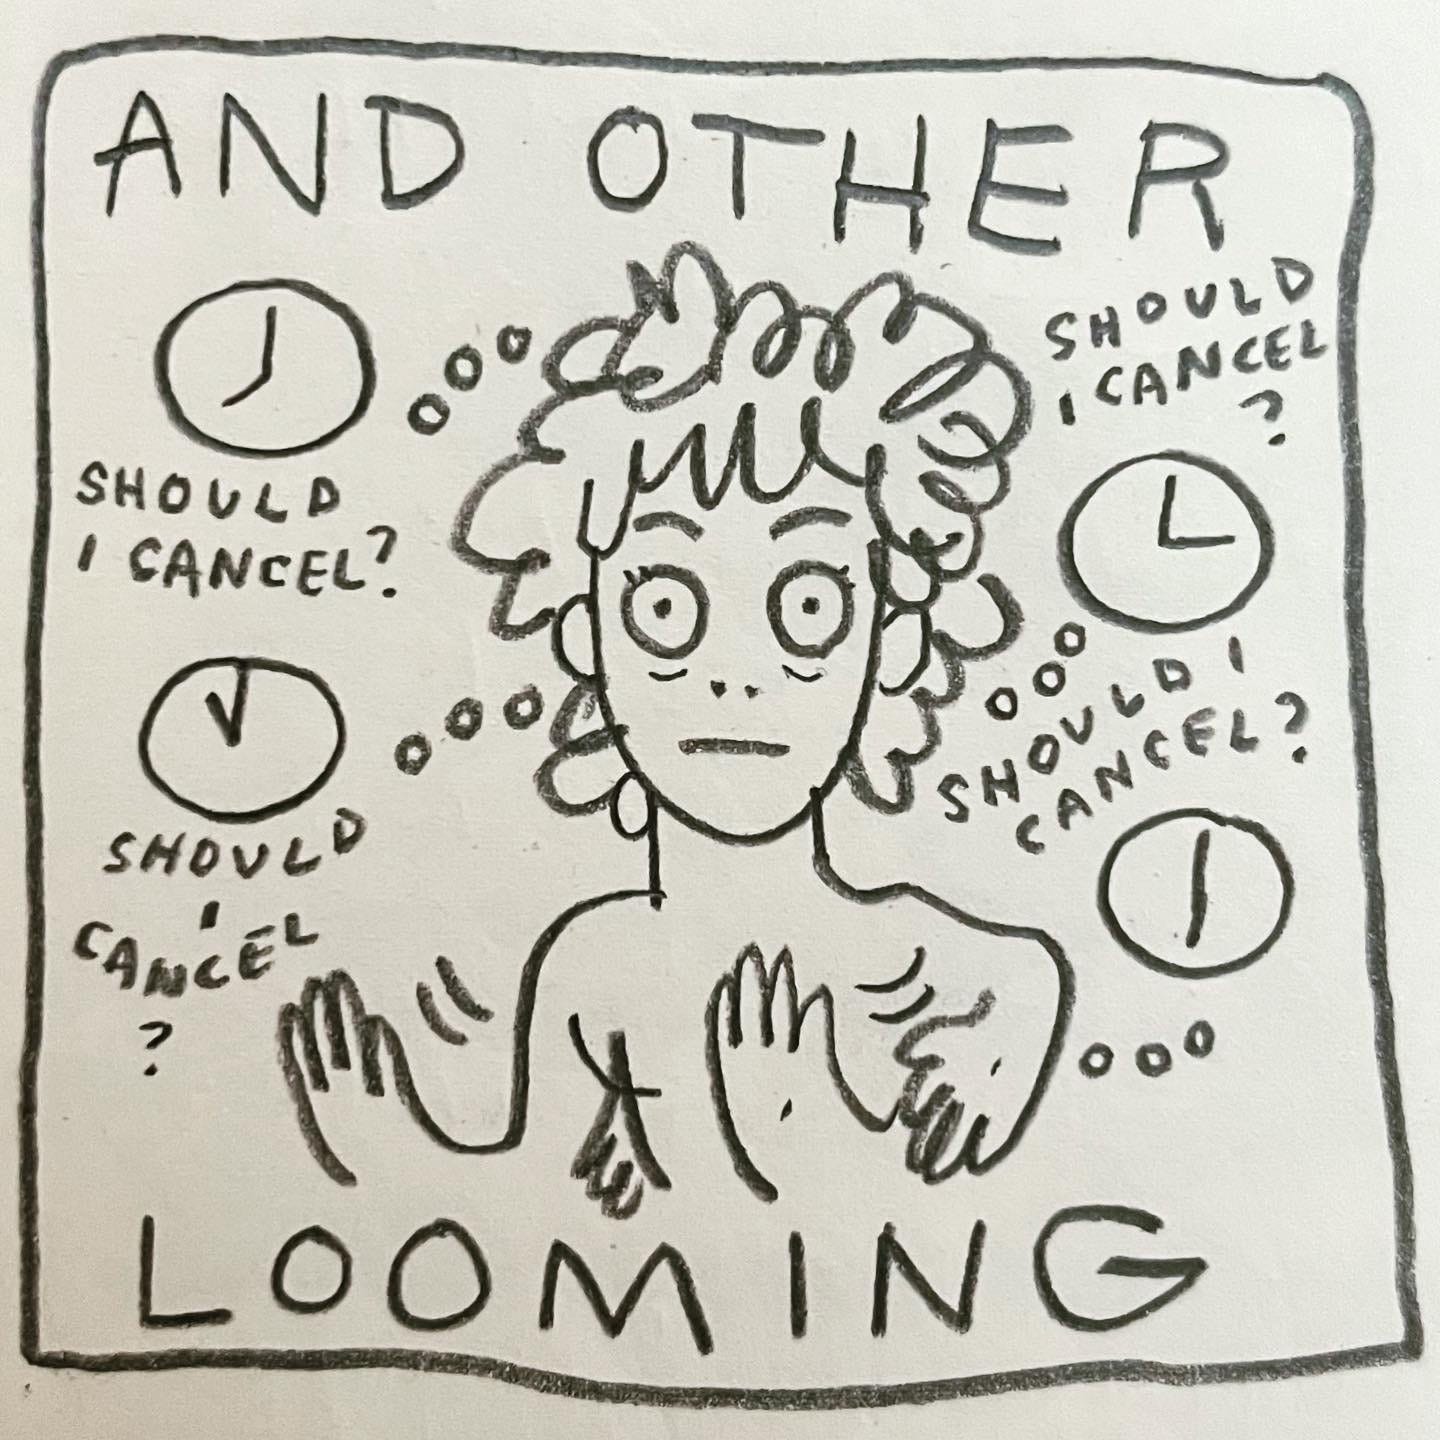 Panel 3: and other looming Image: Wide eyed and tired, Lark is caught in an unending cycle, surrounded by clocks, arms swinging in perpetual motion. They wonder, "Should I cancel? Should I cancel? Should I cancel? Should I cancel?"